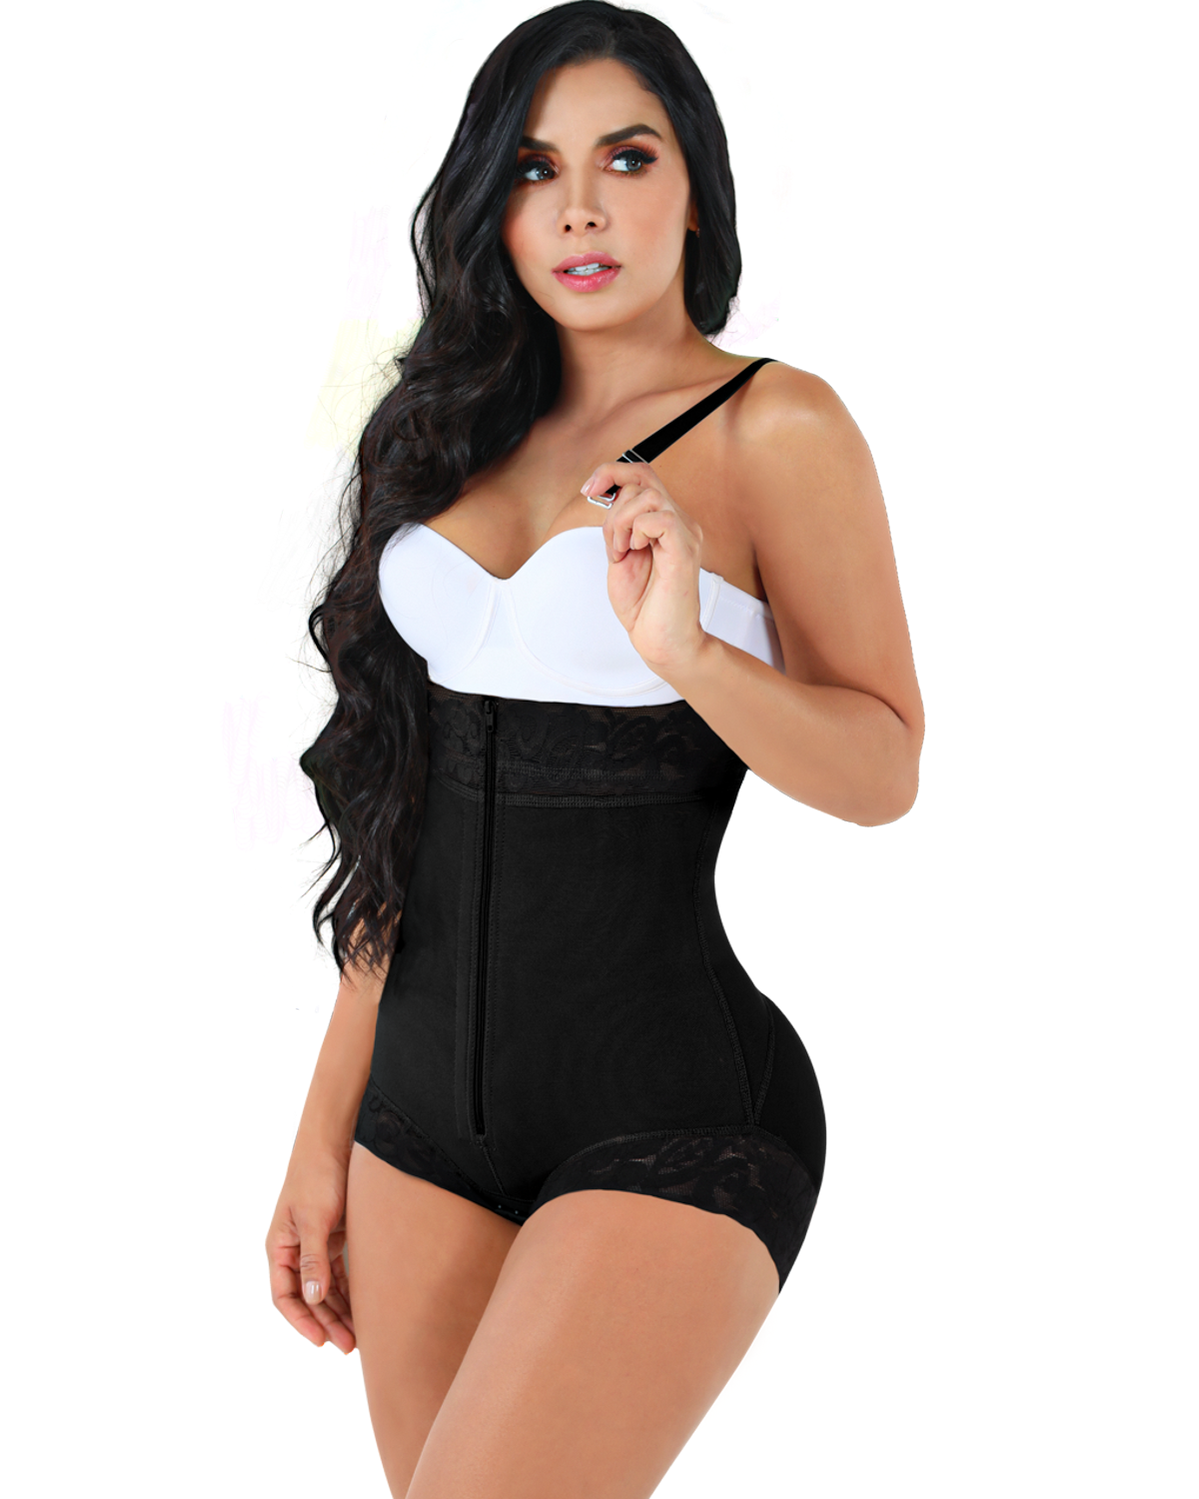 Panty Body Shaper Strapless With Zipper